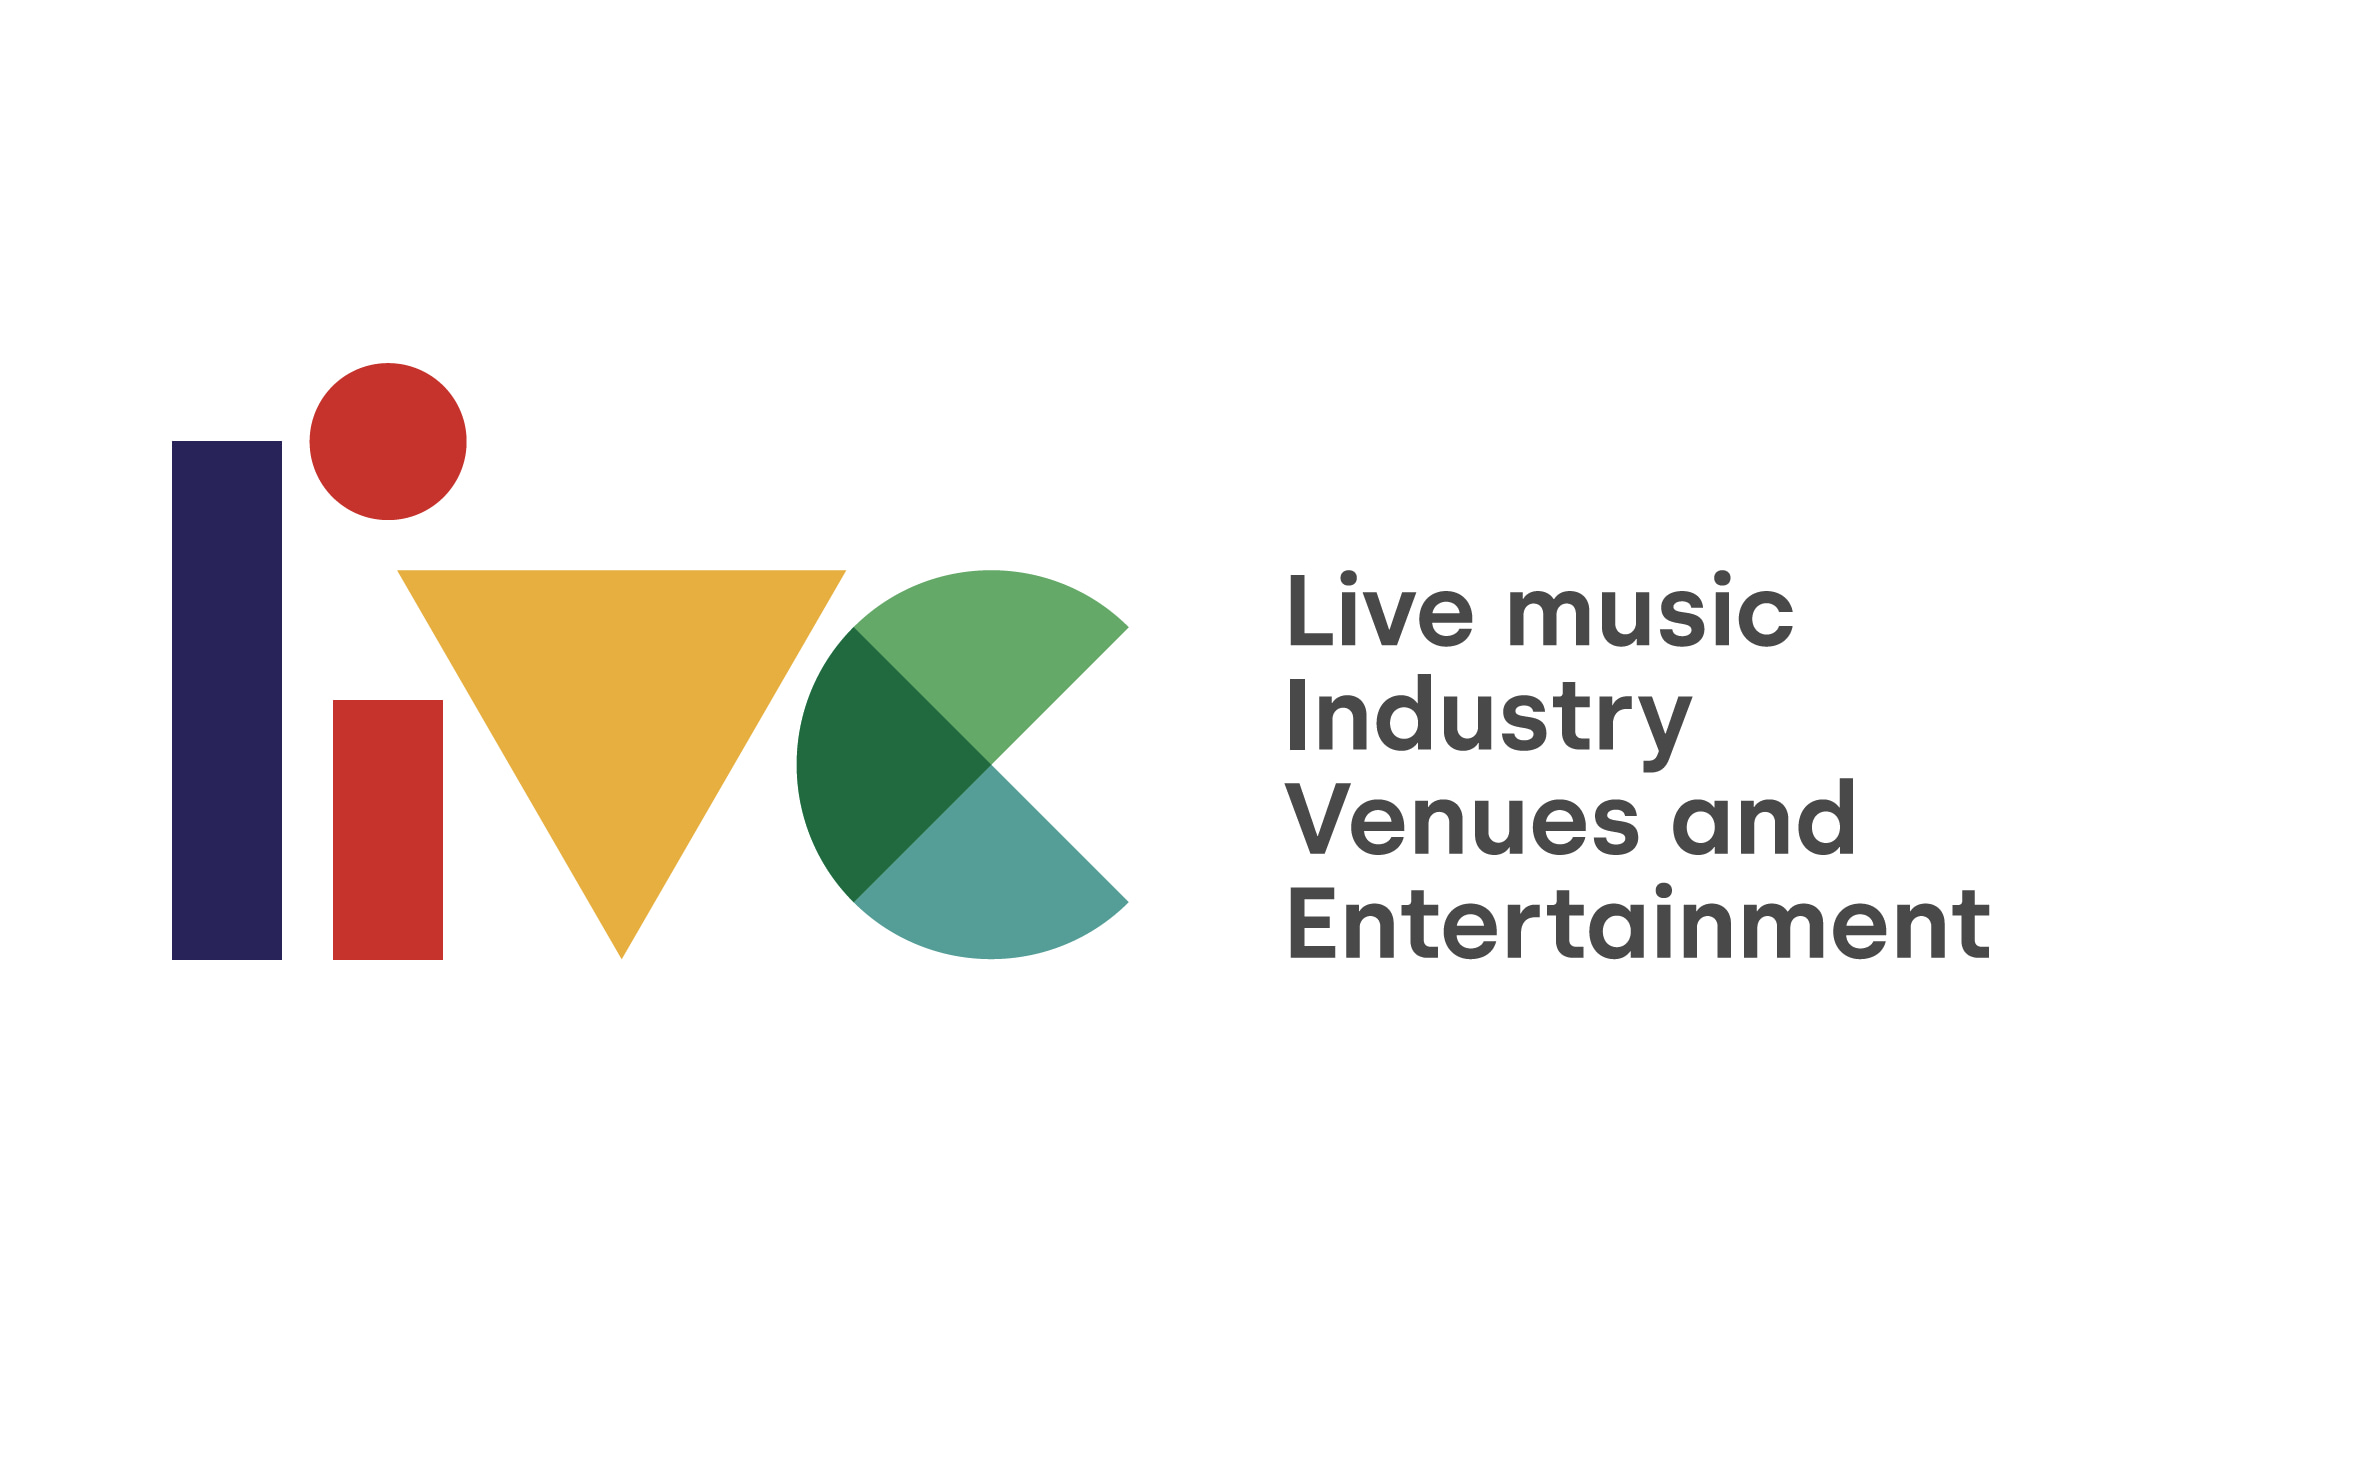 LIVE logo which says "Live music, Industry, Venues and entertainment"